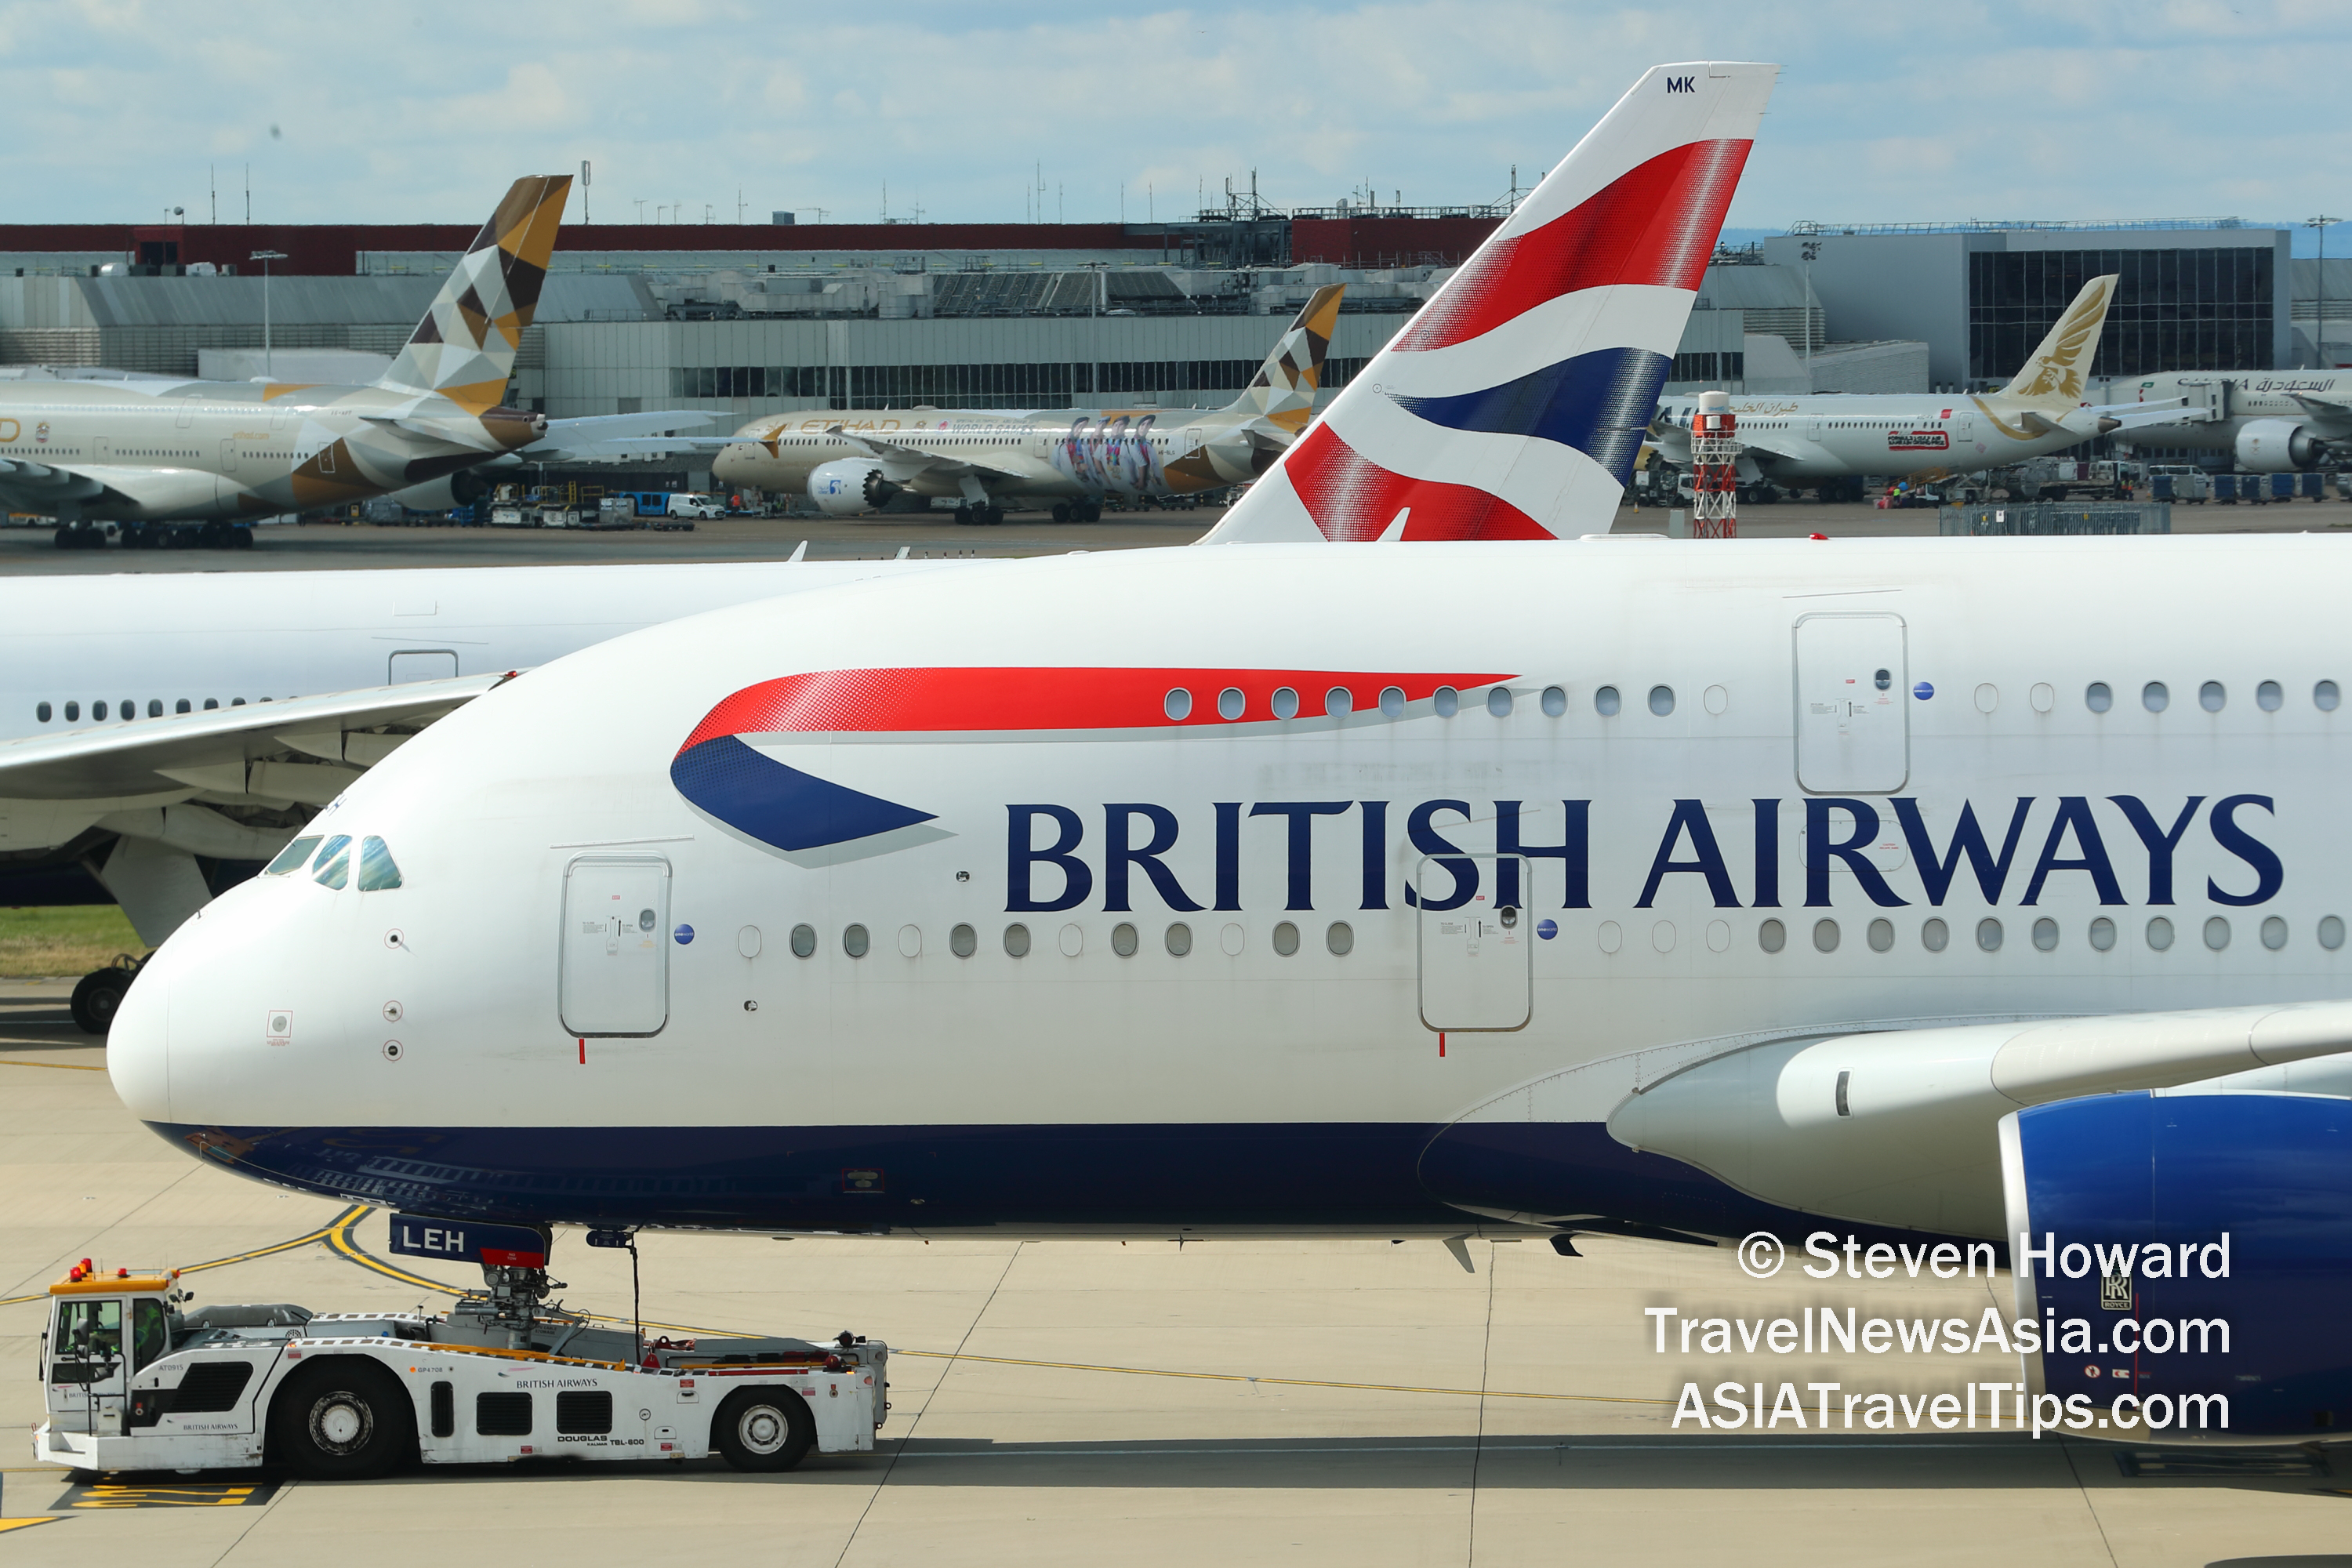 British Airways aircraft at London Heathrow. Picture by Steven Howard of TravelNewsAsia.com Click to enlarge.